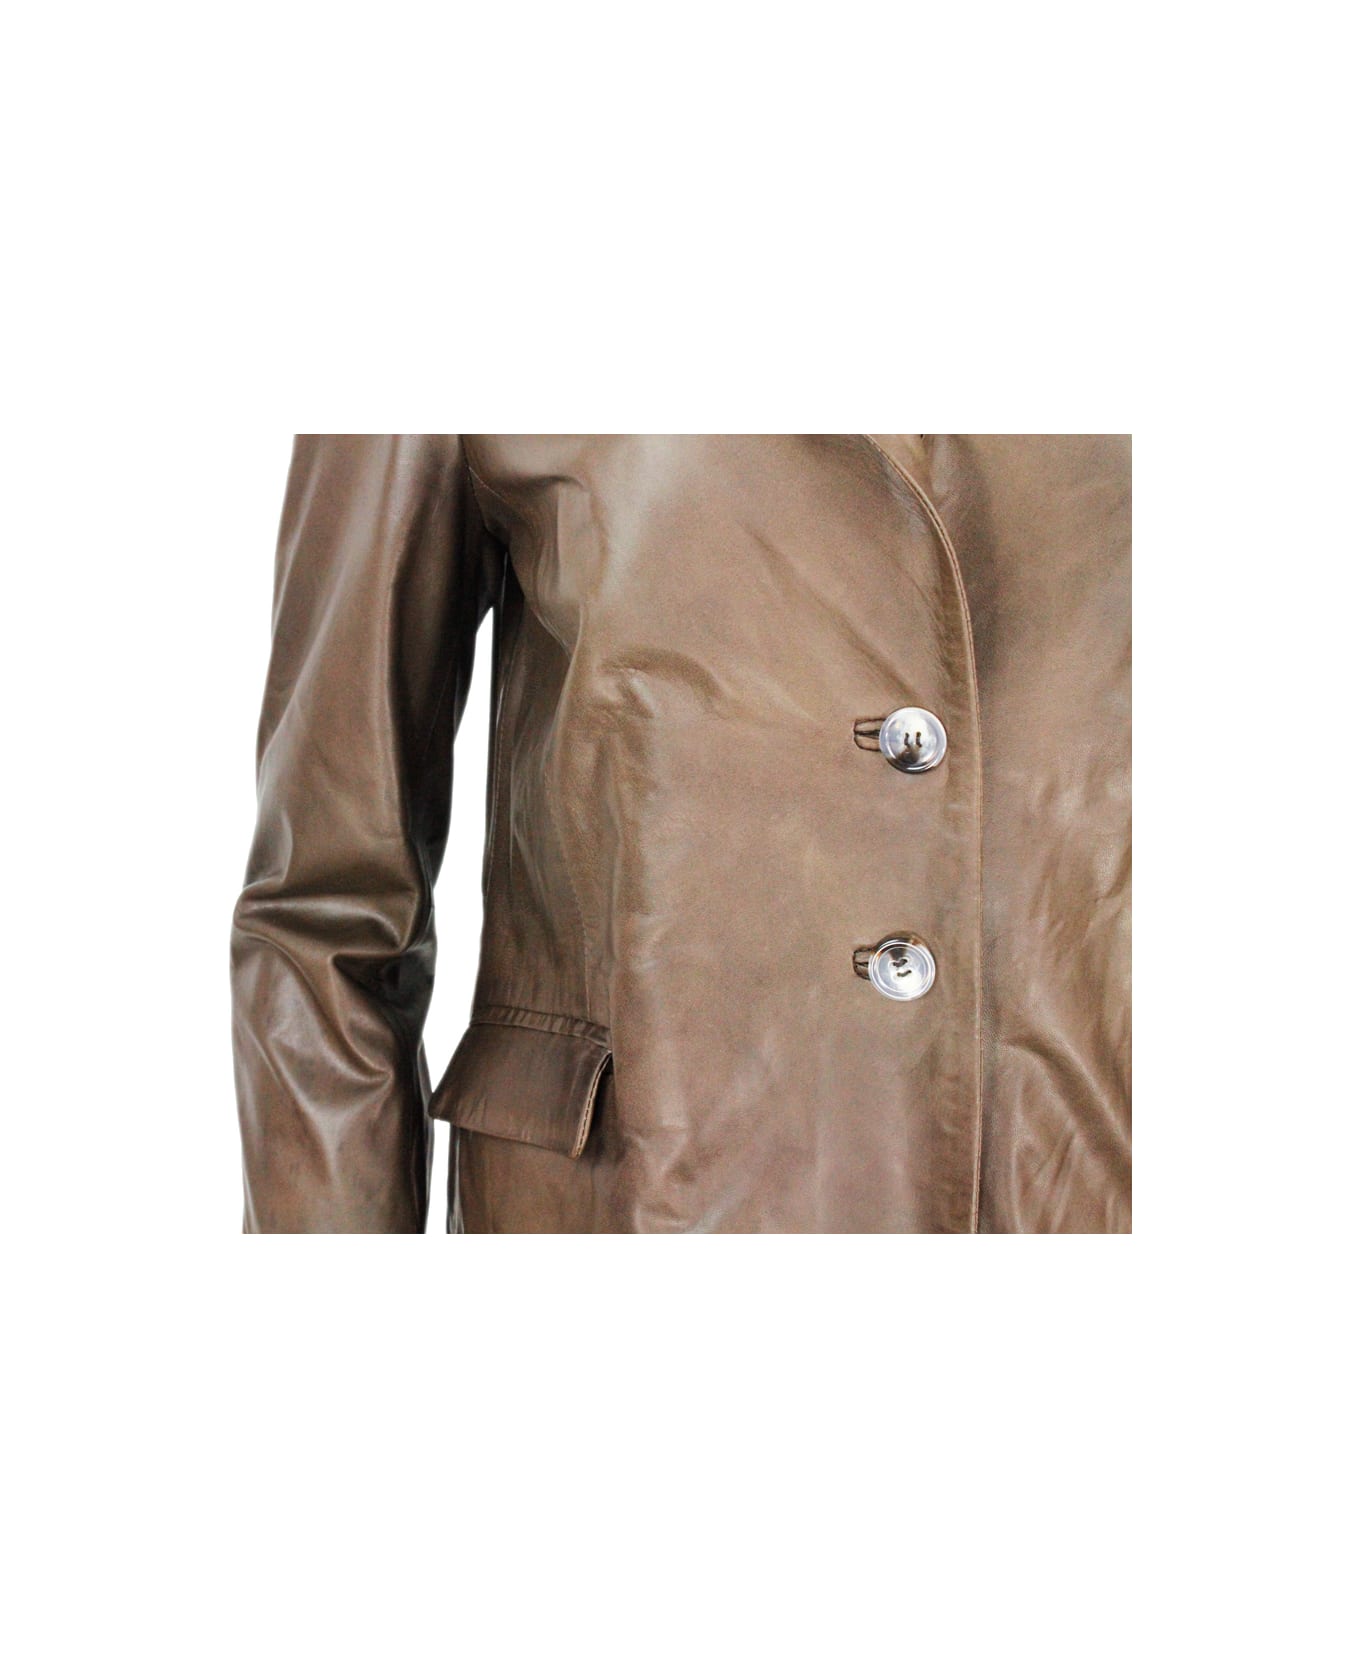 Barba Napoli Soft Leather Blazer Jacket With 2 Button Closure And Flap Pockets - Brown ジャケット